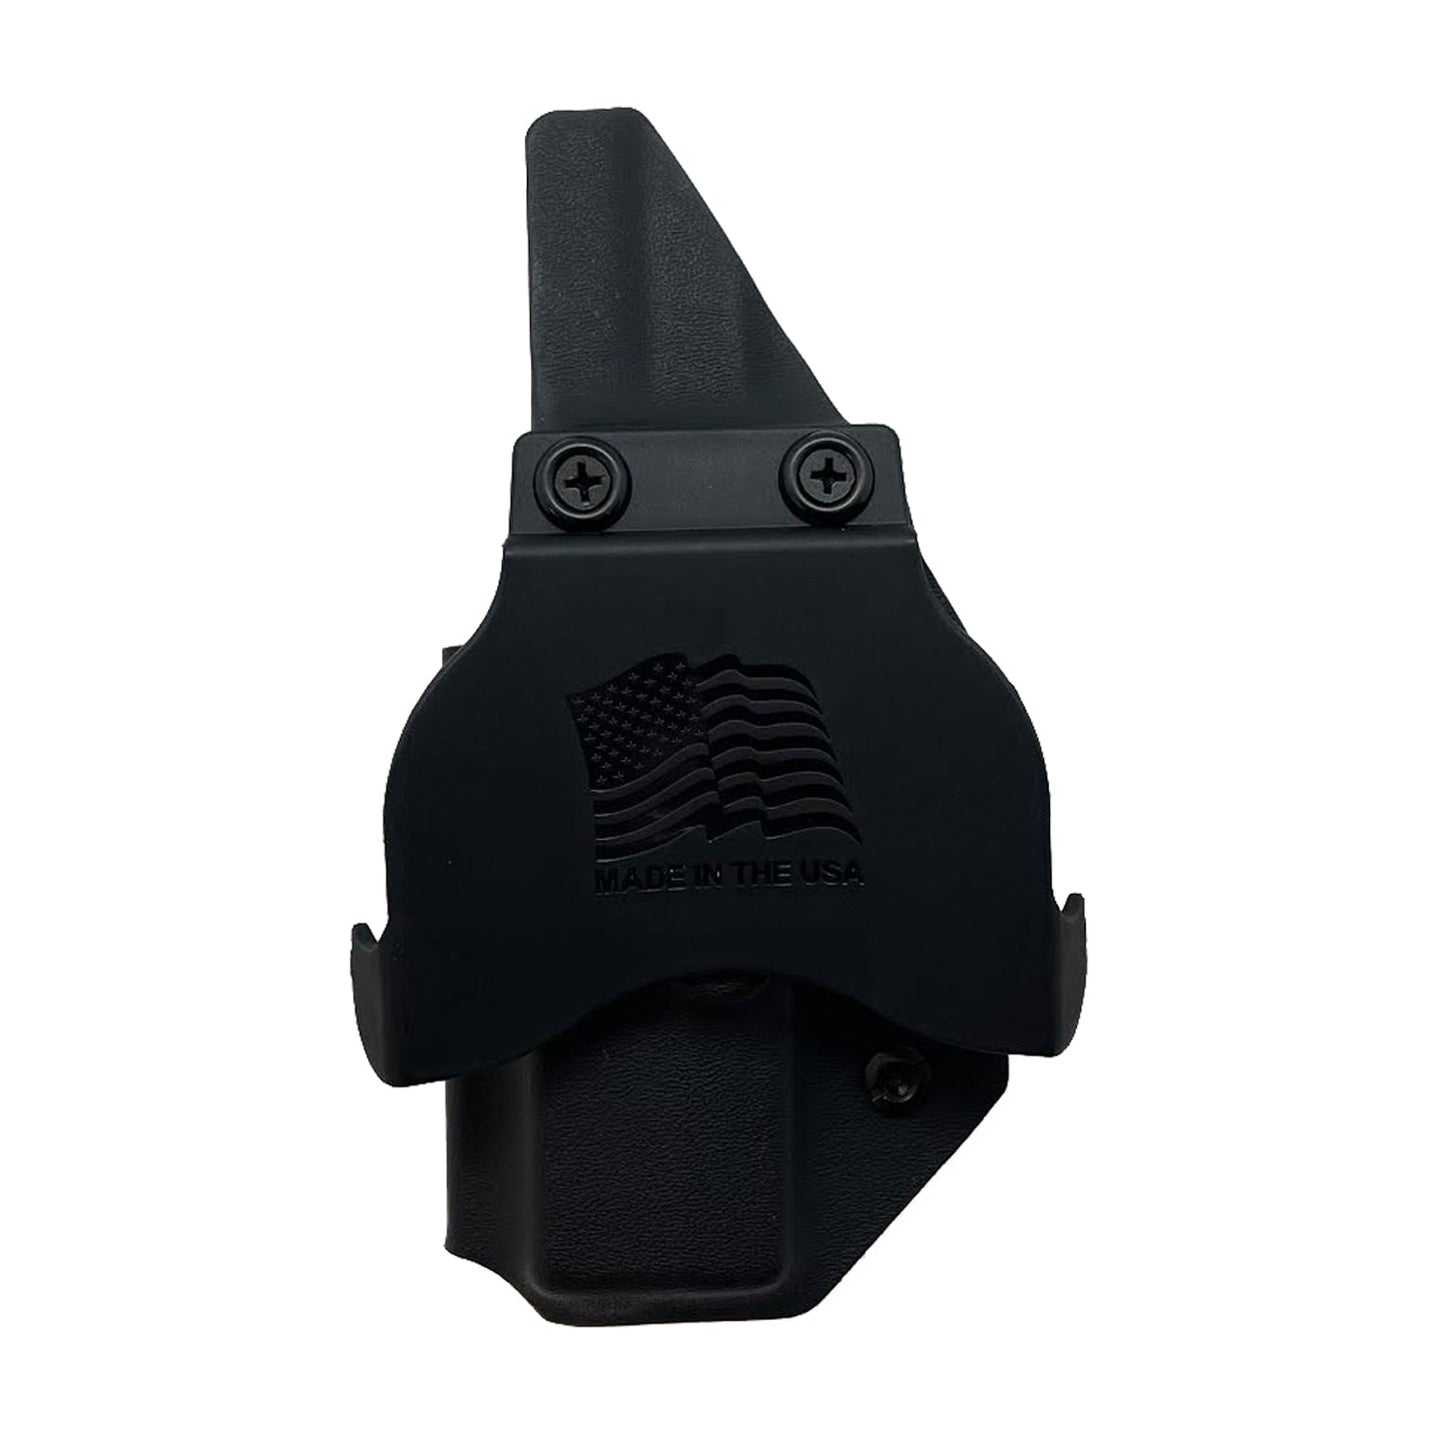 CZ P07 OWB (Outside The Waistband Holster)